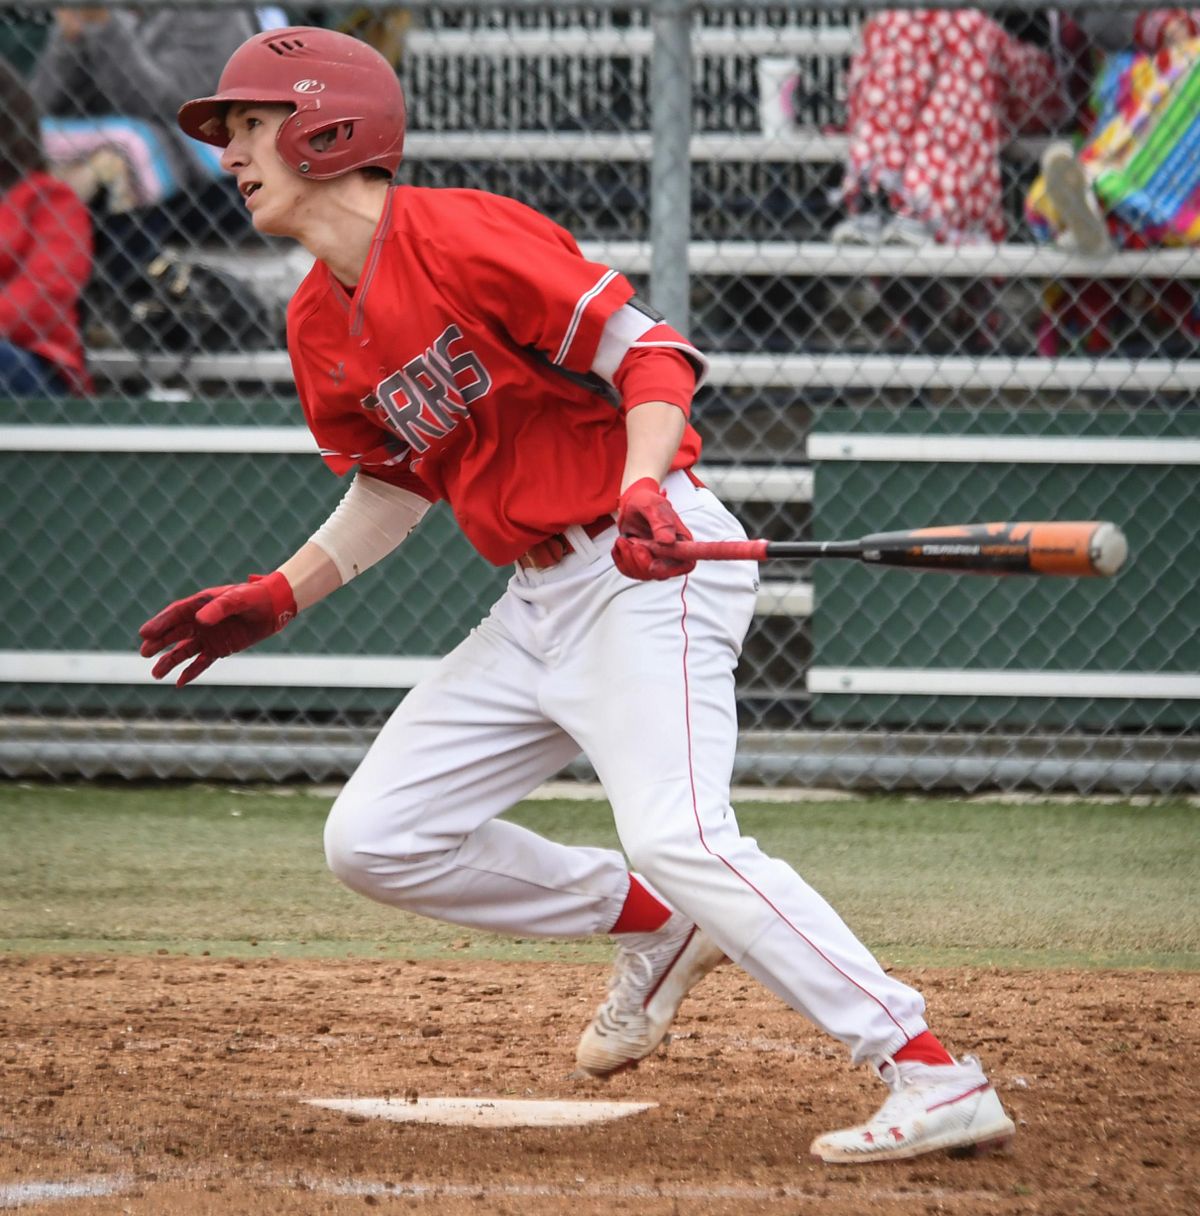 Ferris senior pitcher Brock Bozett hits a single against Gonzaga Prep on Friday, March 29, 2019. Bozett finished with three hits, including a double, and pitched the Saxons to a 12-7 win. (Dan Pelle / The Spokesman-Review)